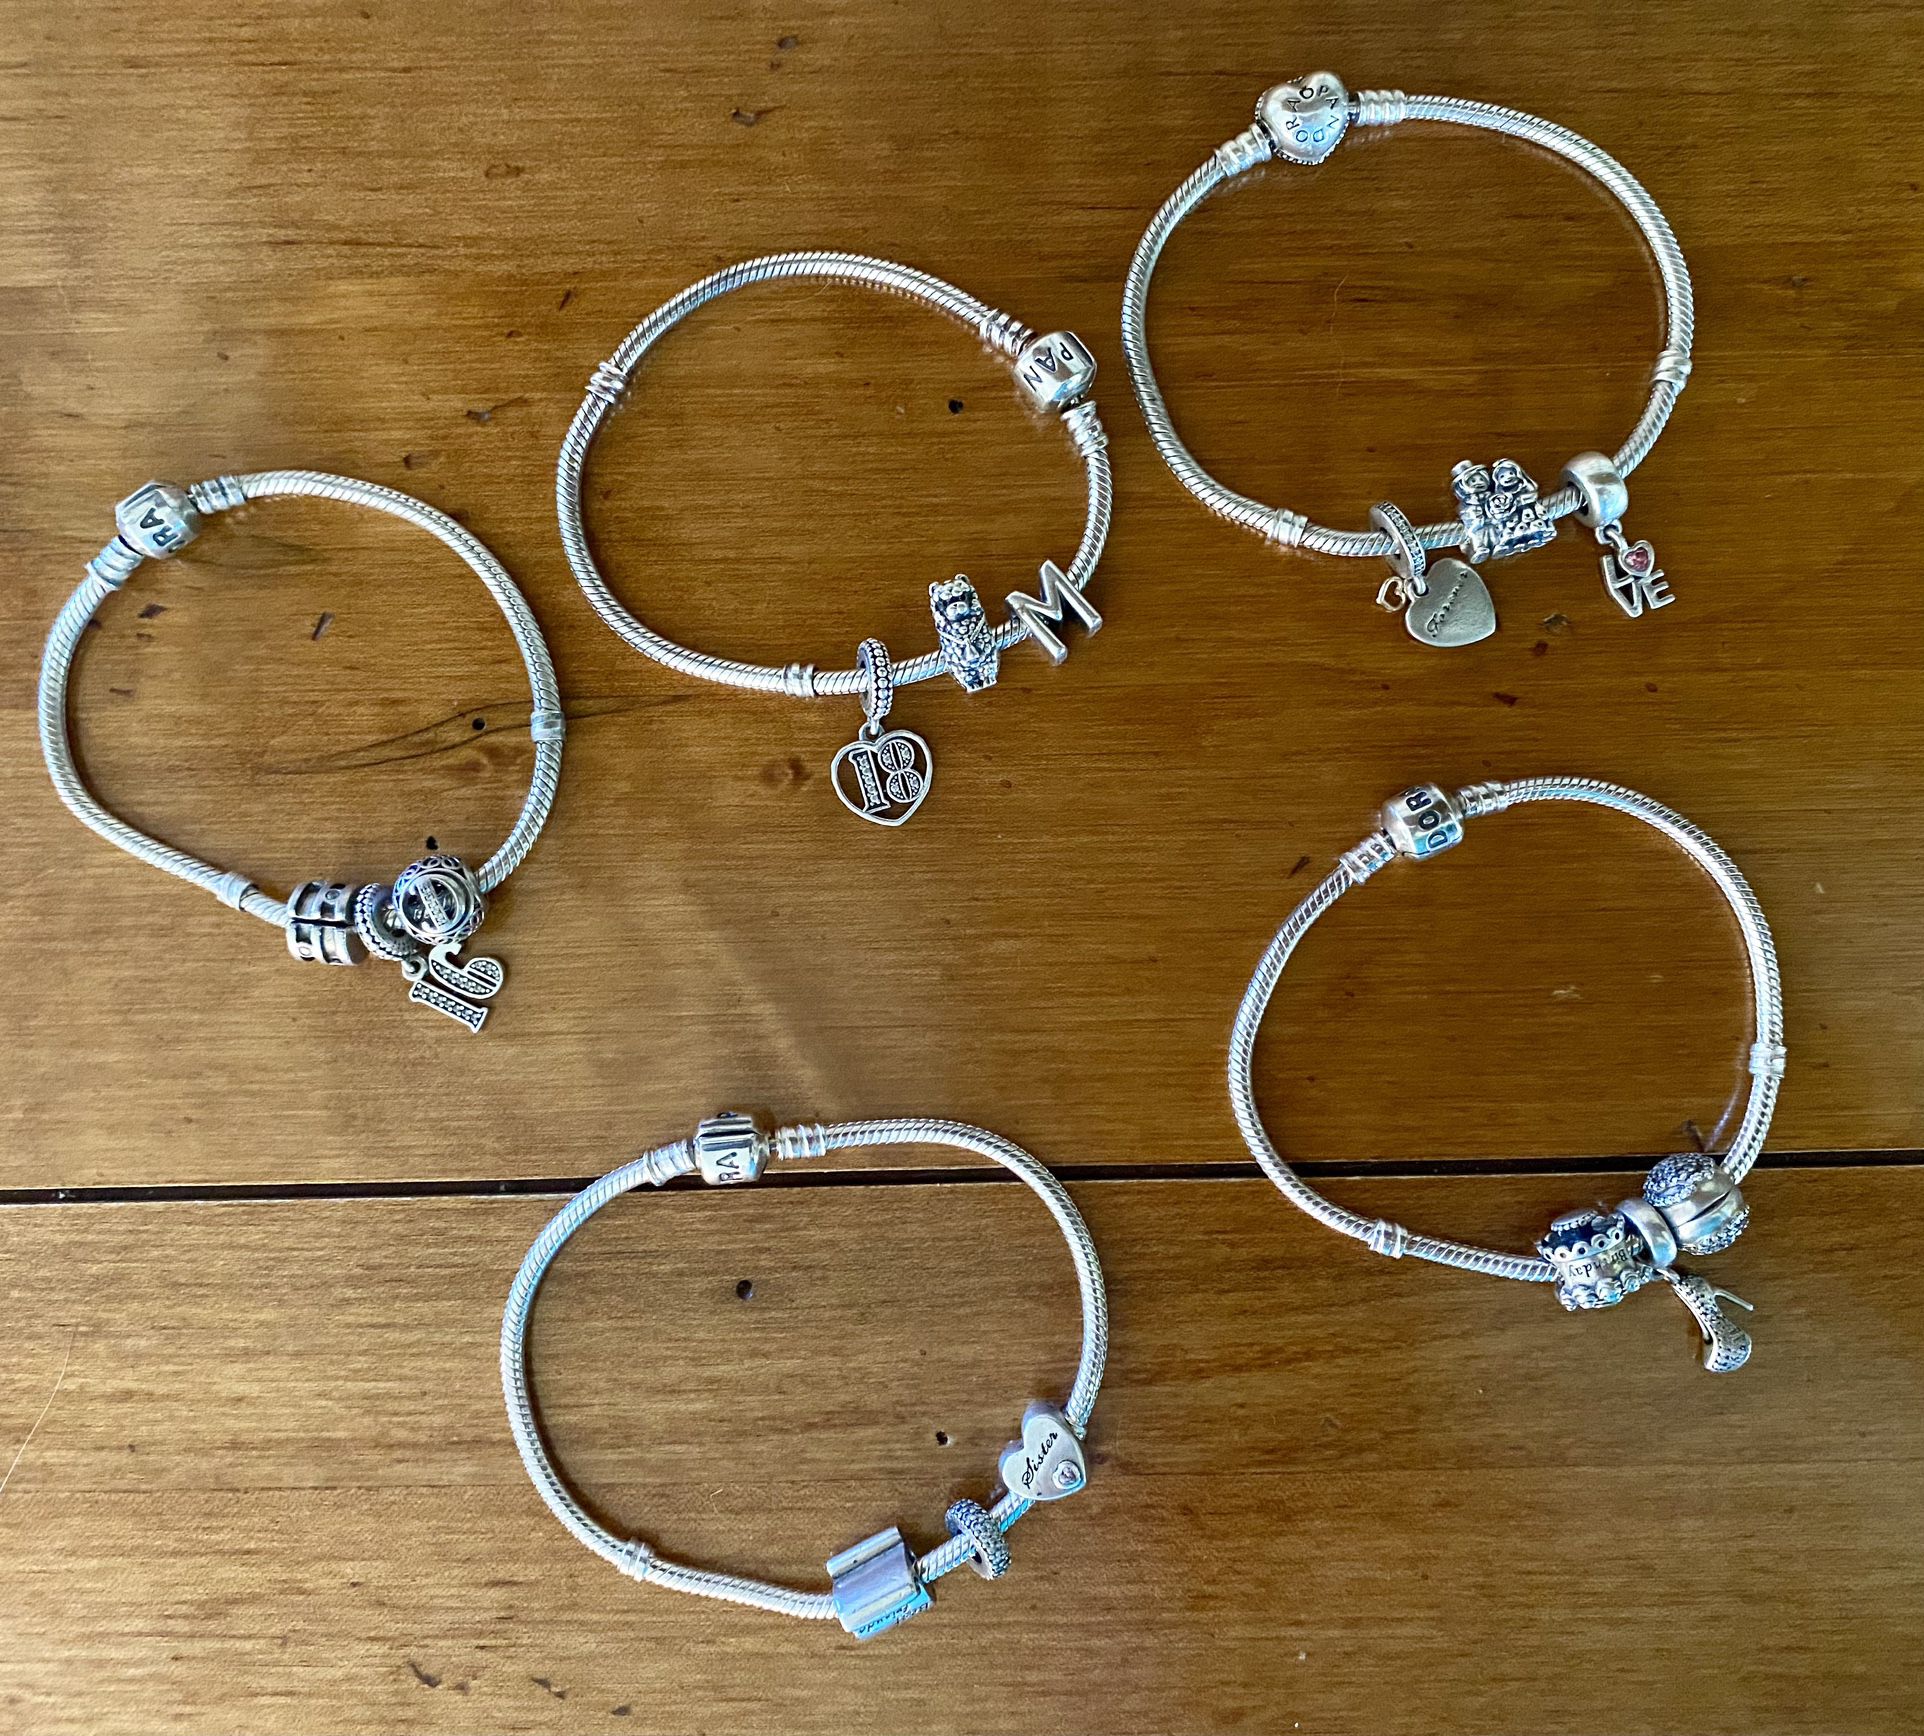 Pandora sterling silver bracelets and charms lot of 5